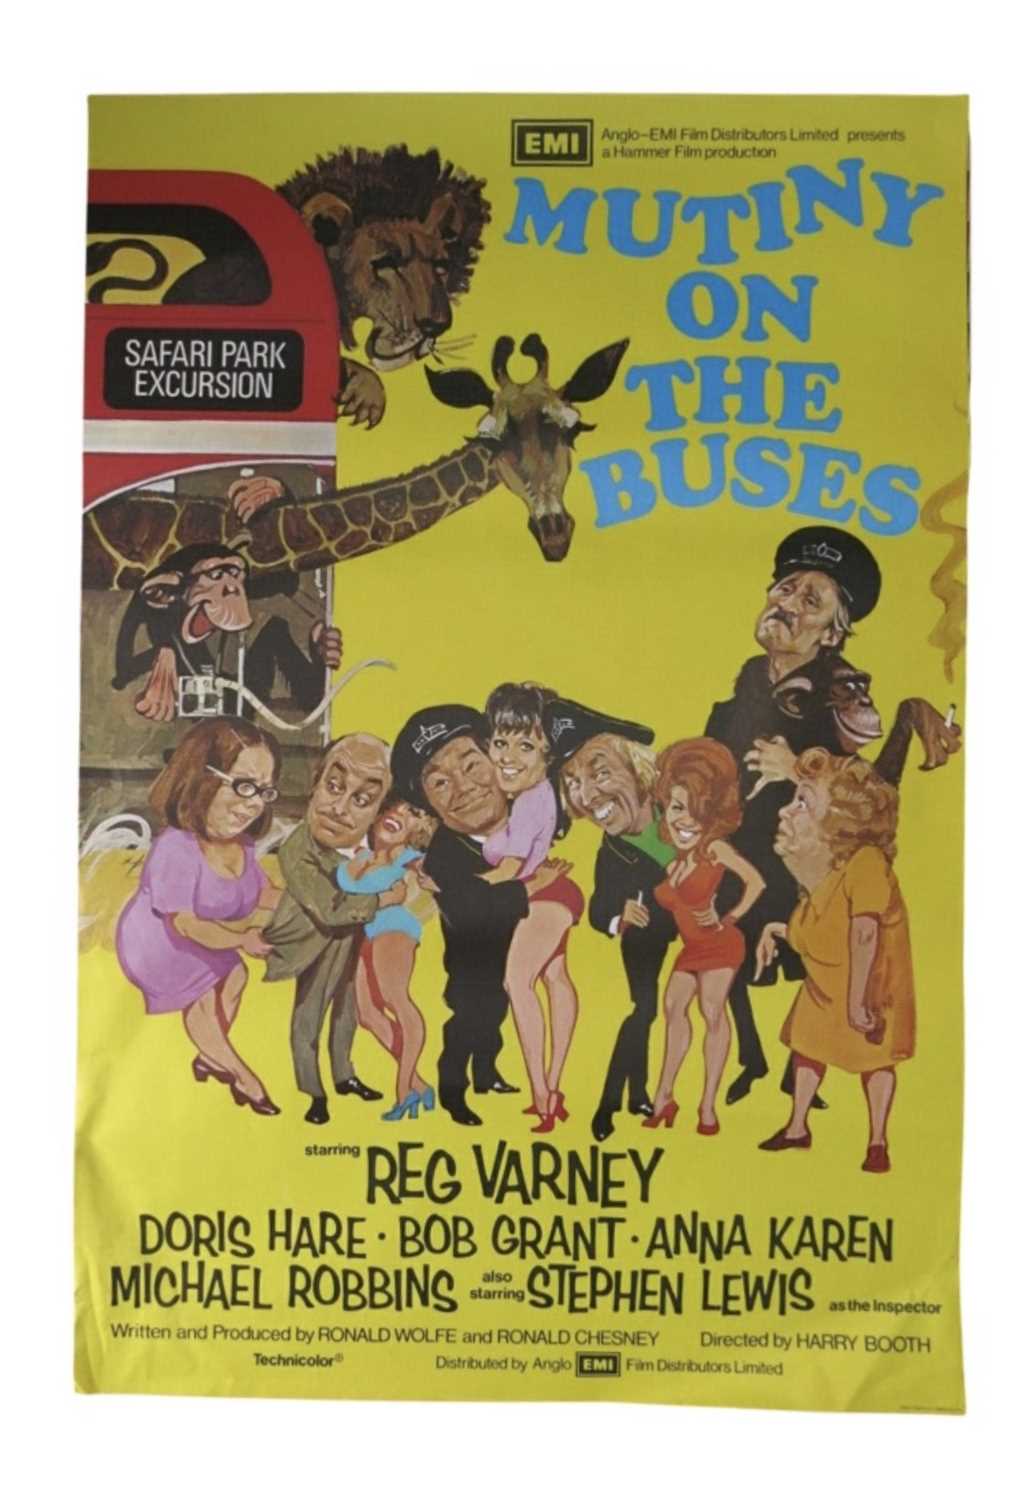 An original British one sheet poster for Mutiny on the Buses (1972) from the Studio Canal Archive at